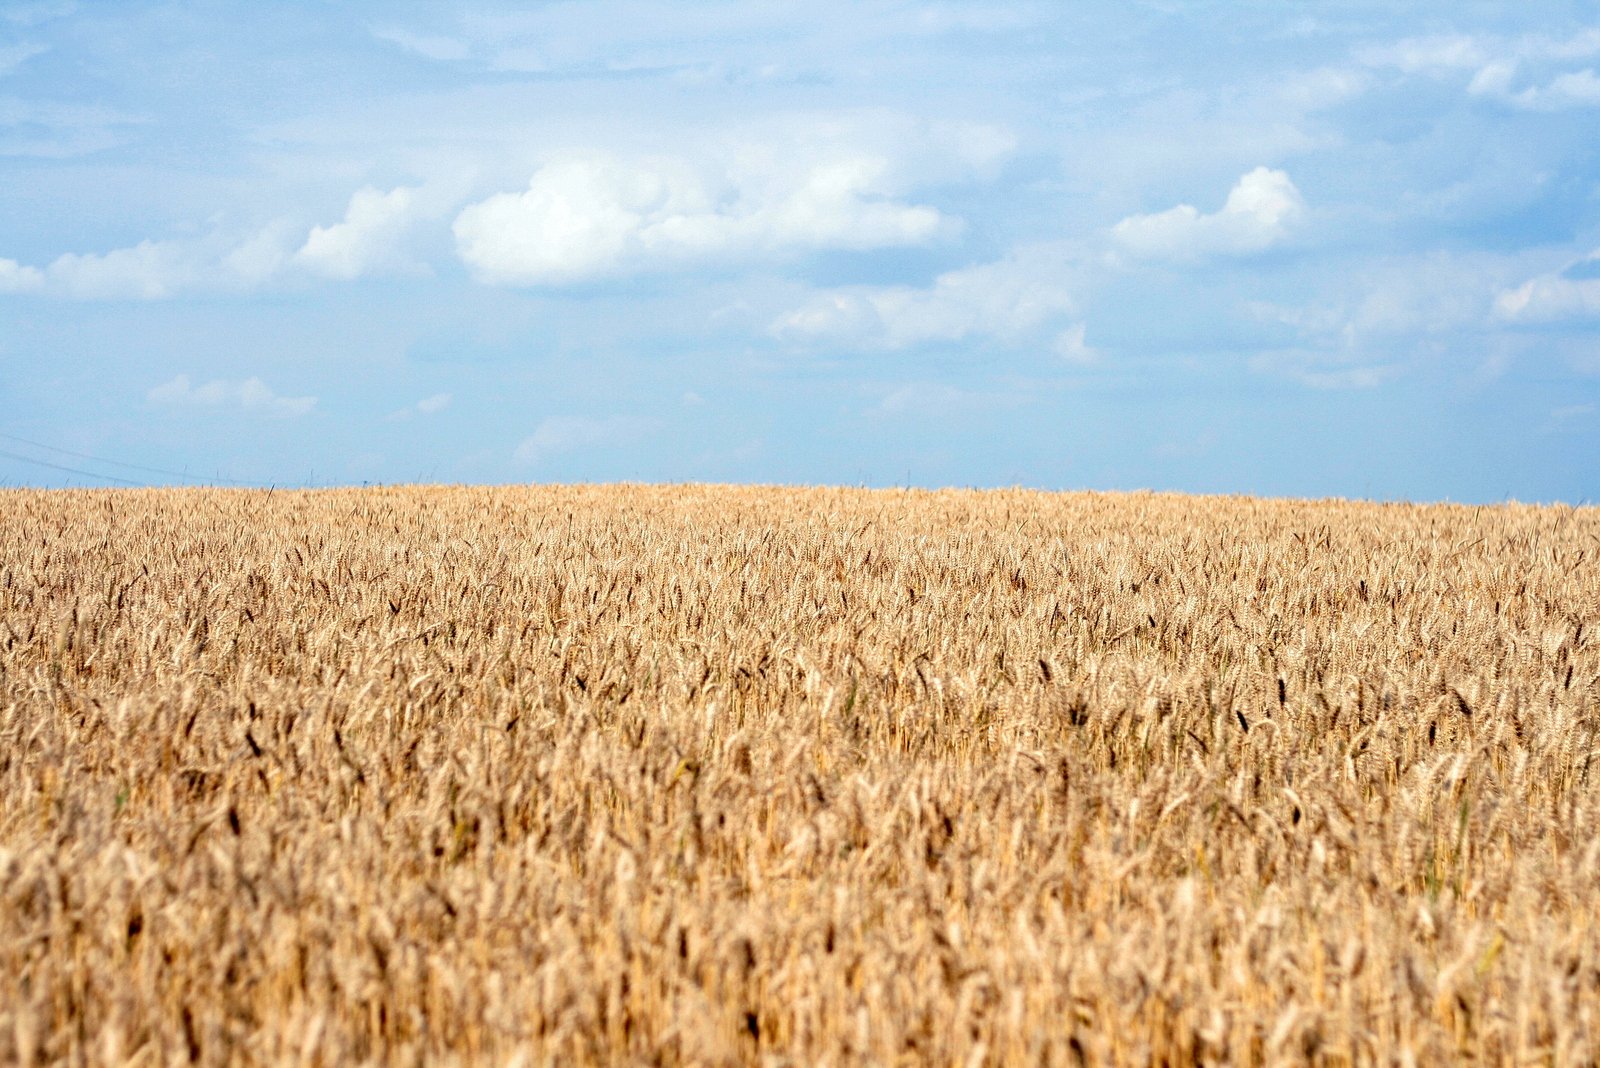 a field full of ripe wheat under a blue sky with a lone plane